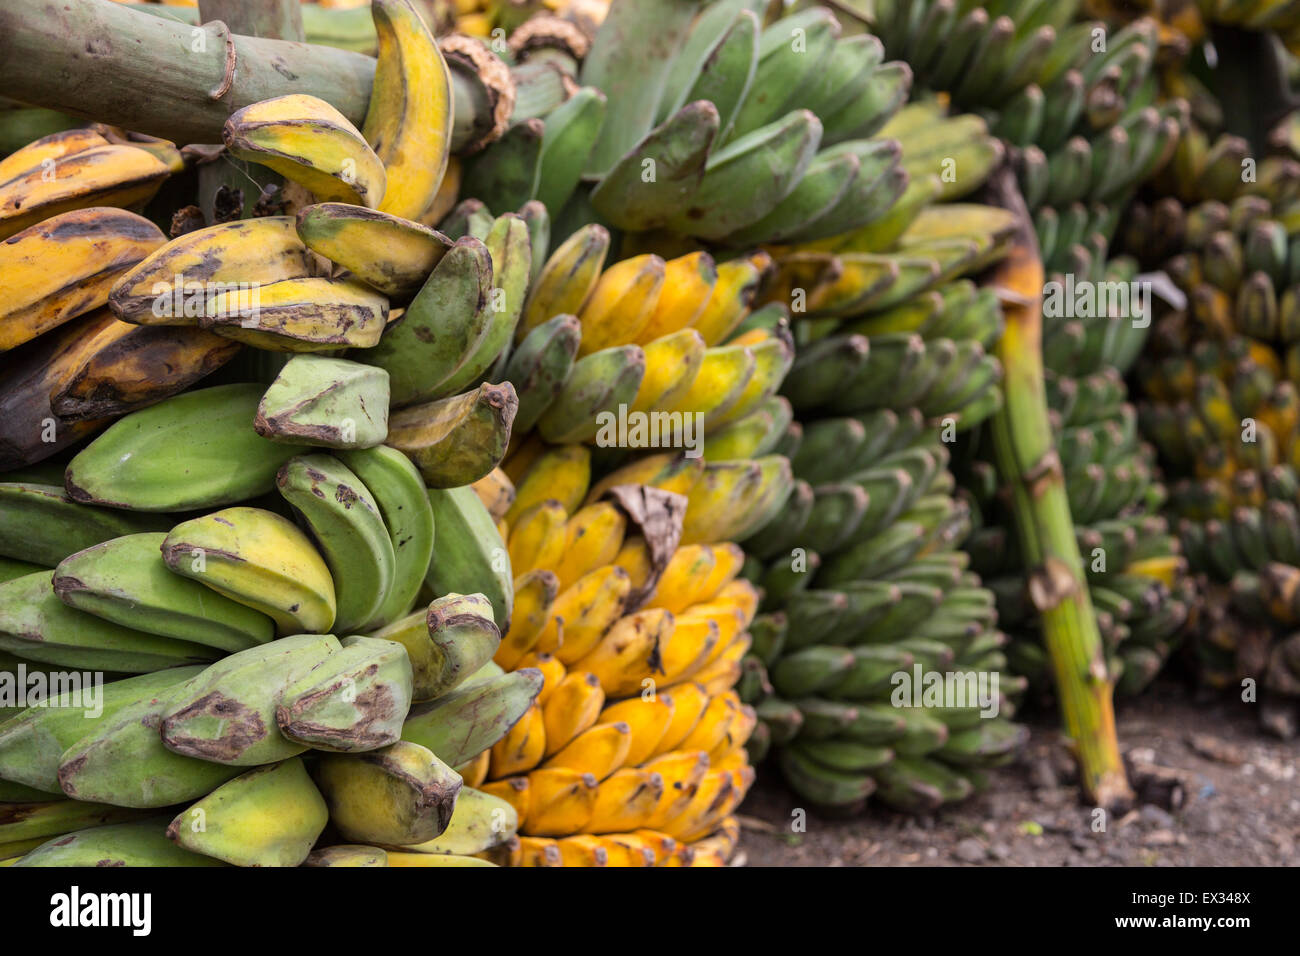 Bananas are displayed at the Tomohon Market in Sulawesi, Indonesia. Stock Photo